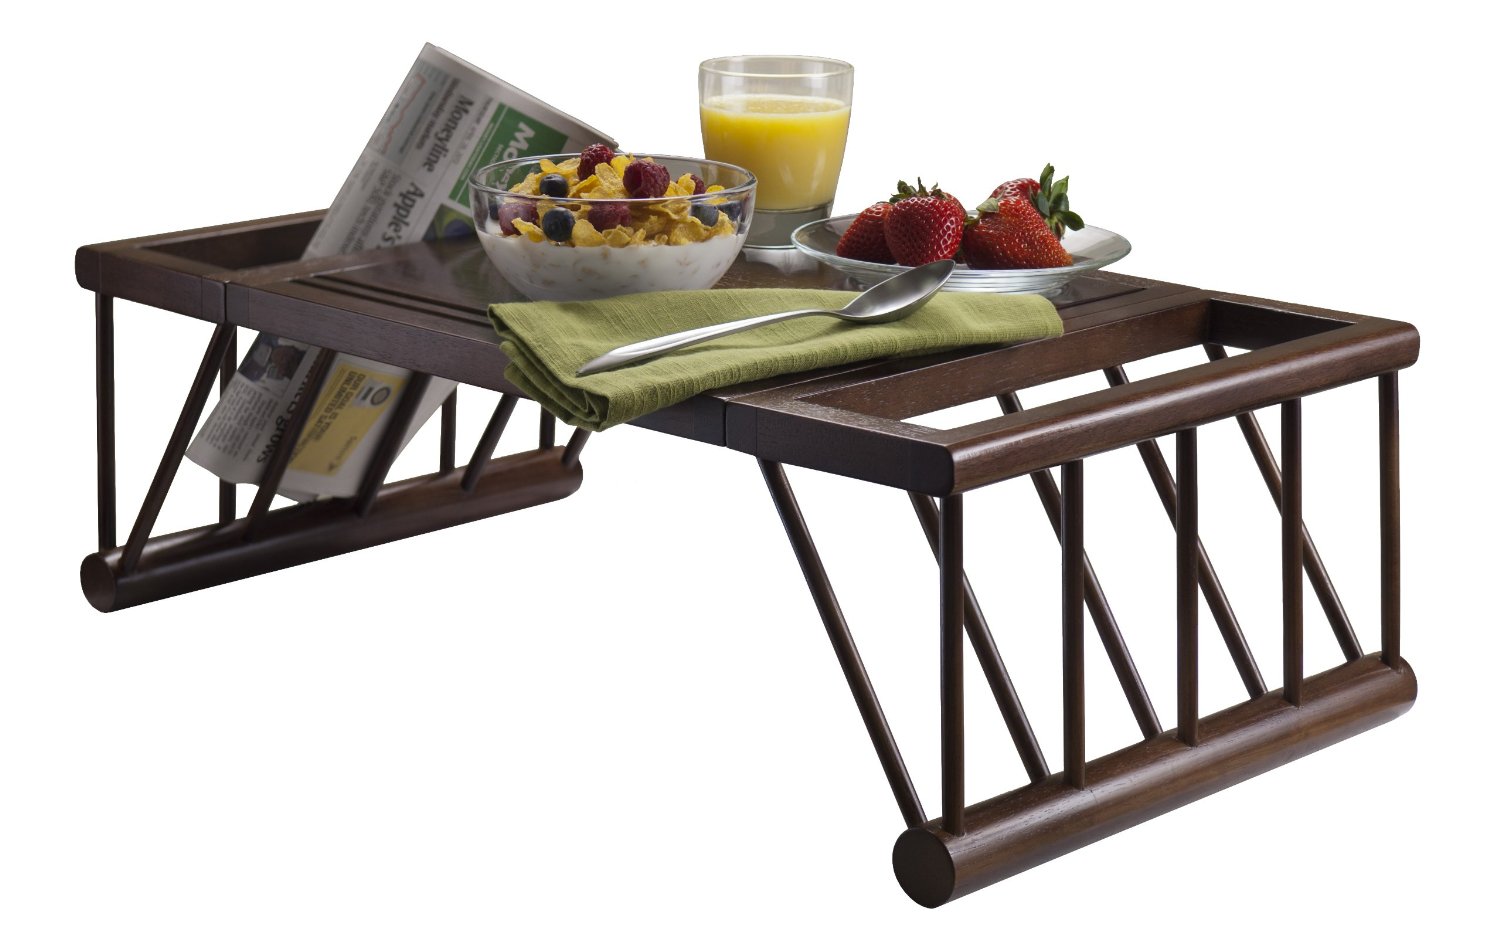 Lap and Bed Breakfast Tray